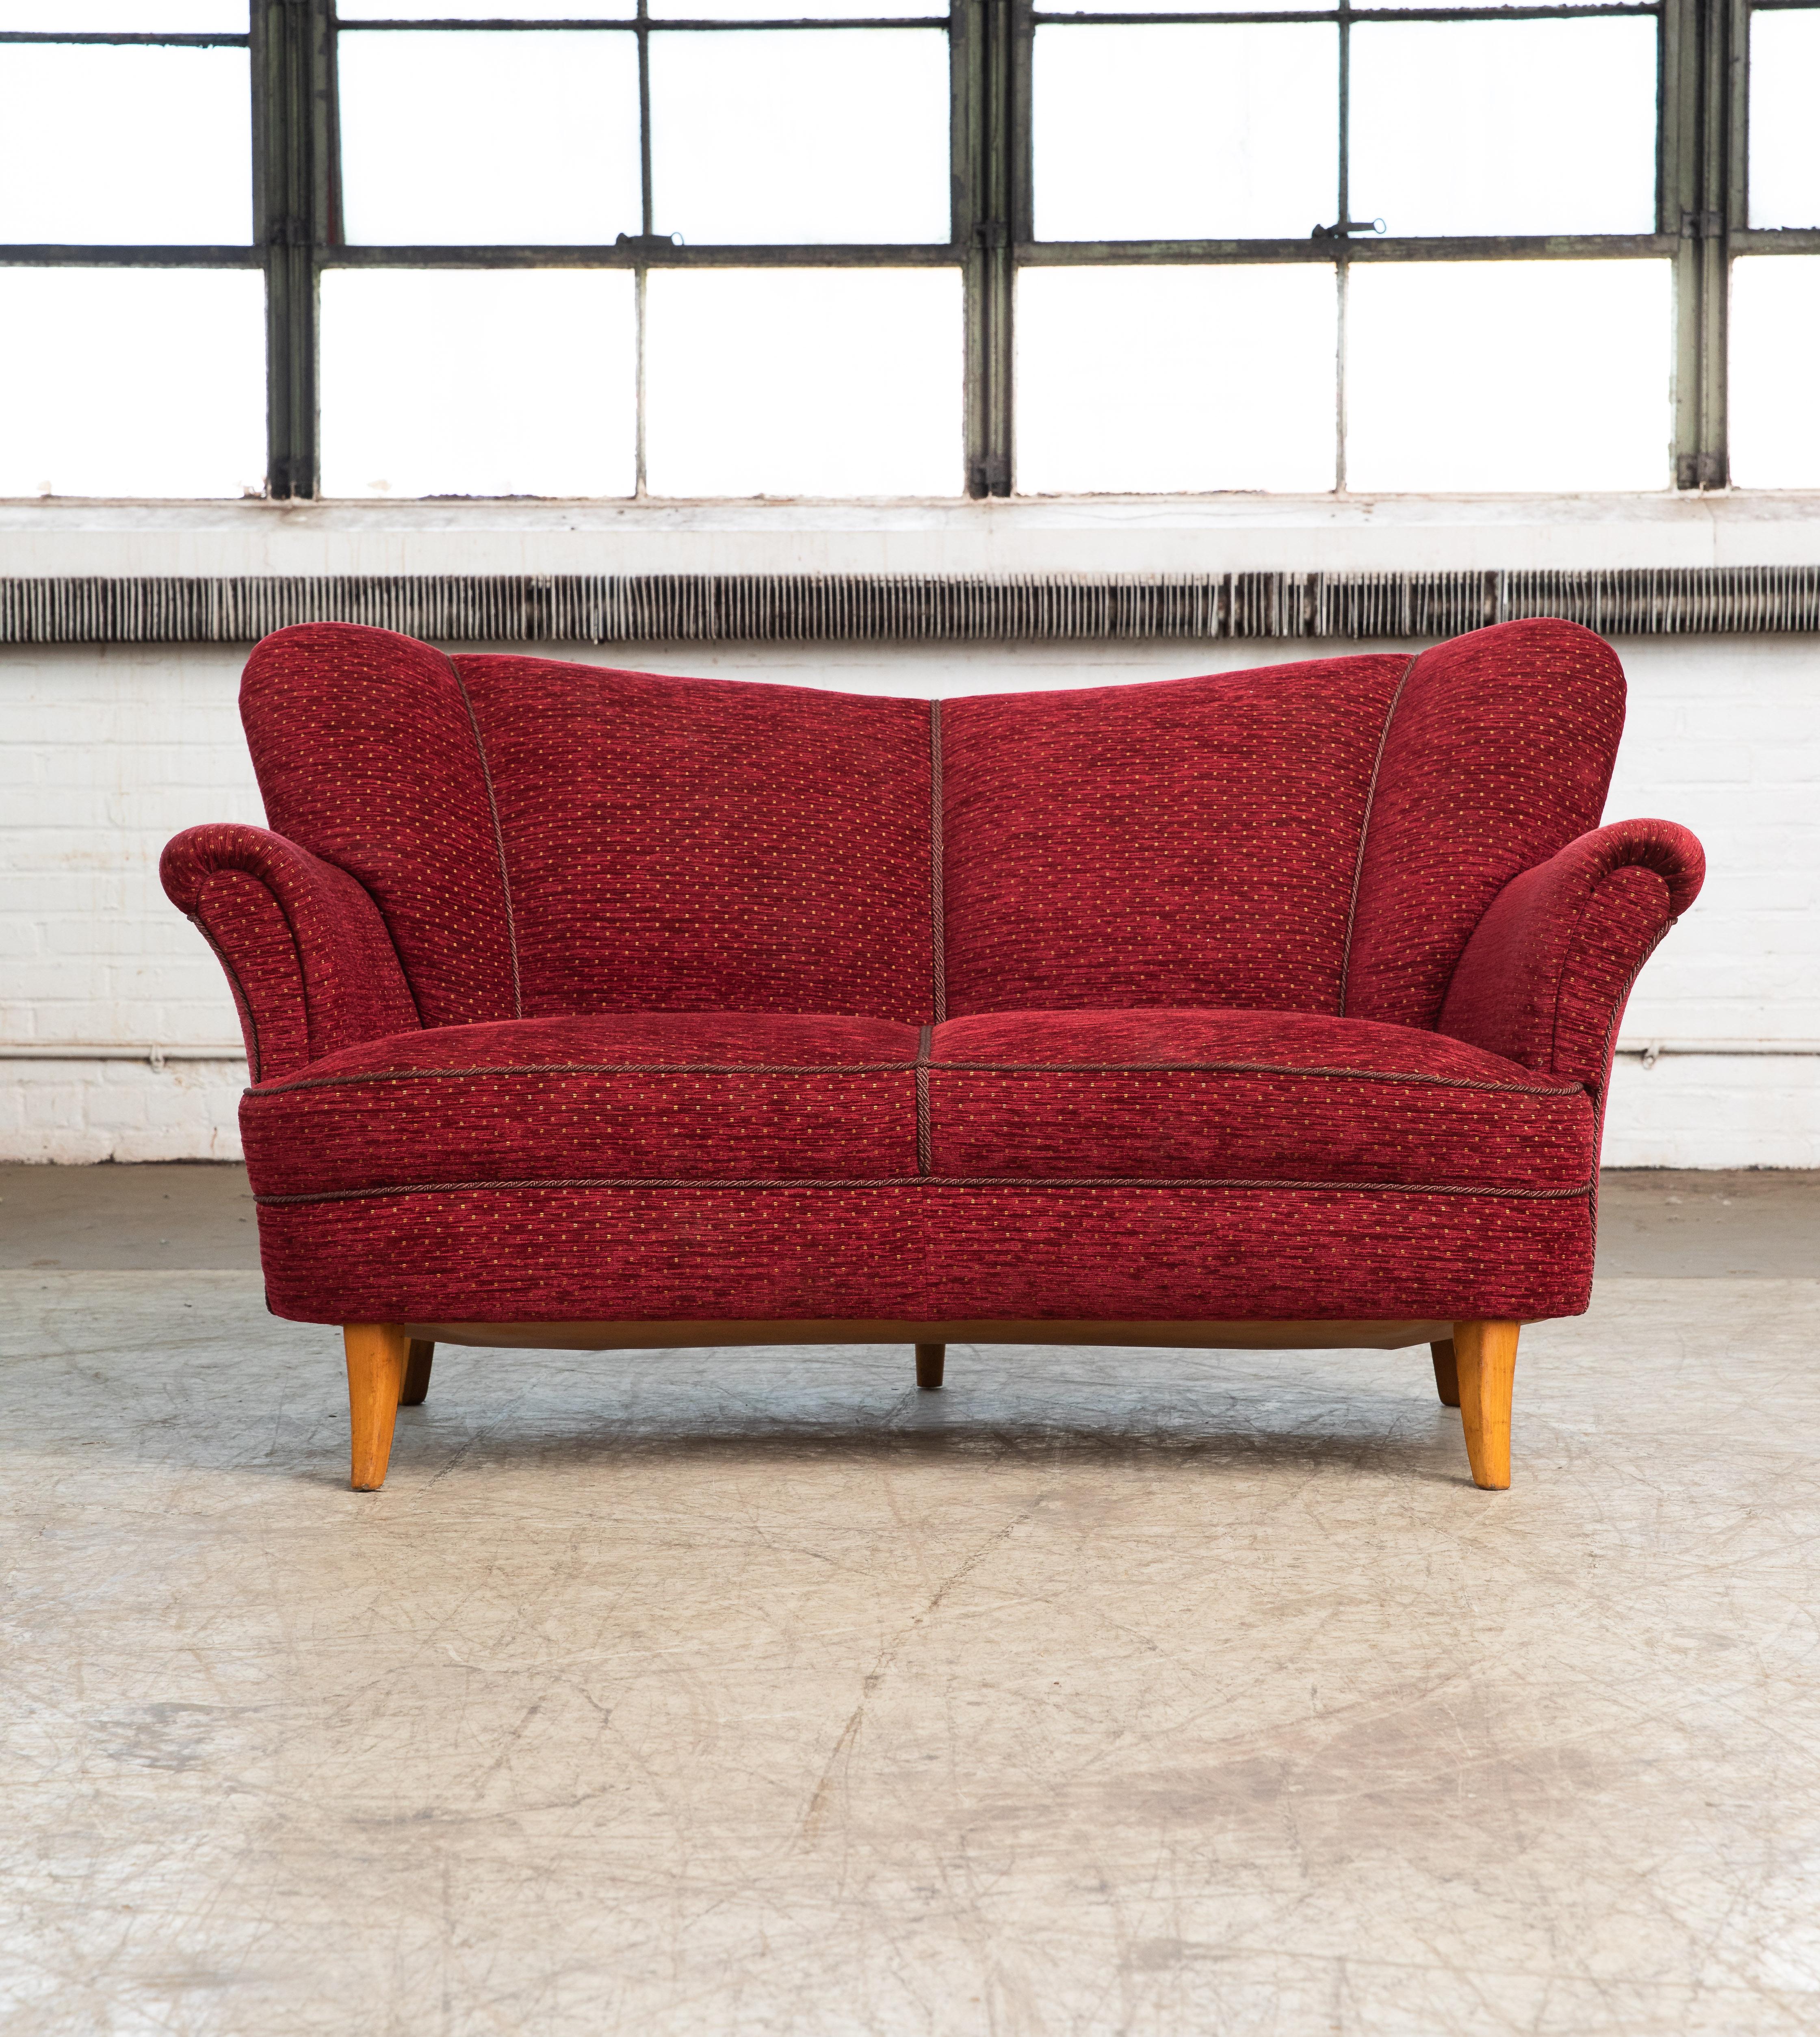 Swedish Danish 1940s Banana Form Curved Sofa or Loveseat in Red Mohair